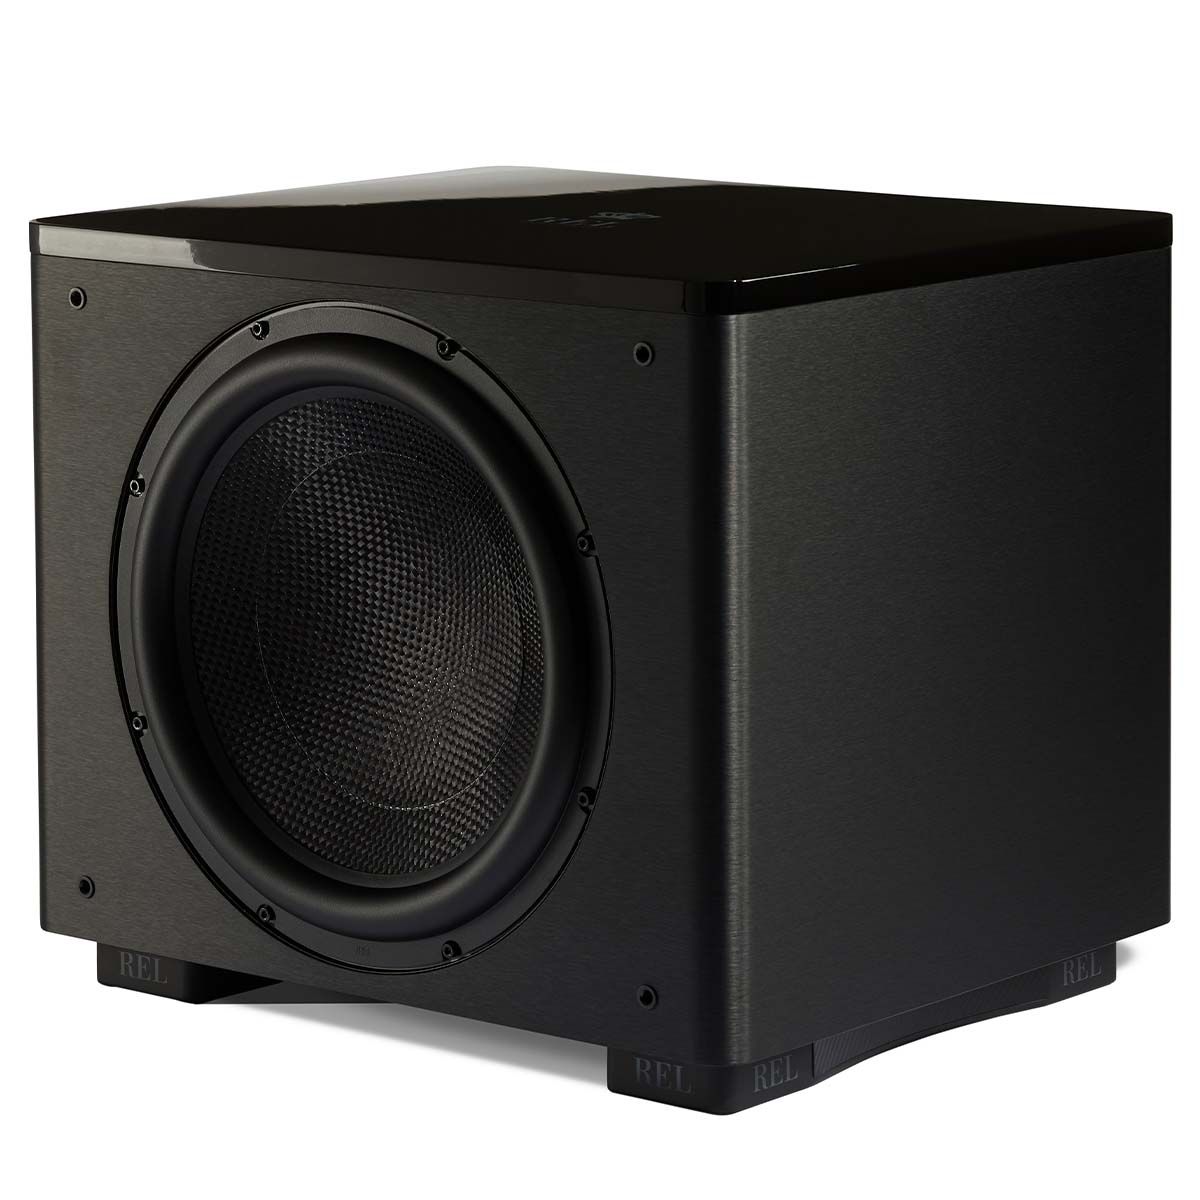 REL HT/1510 Predator Subwoofer - angled front view